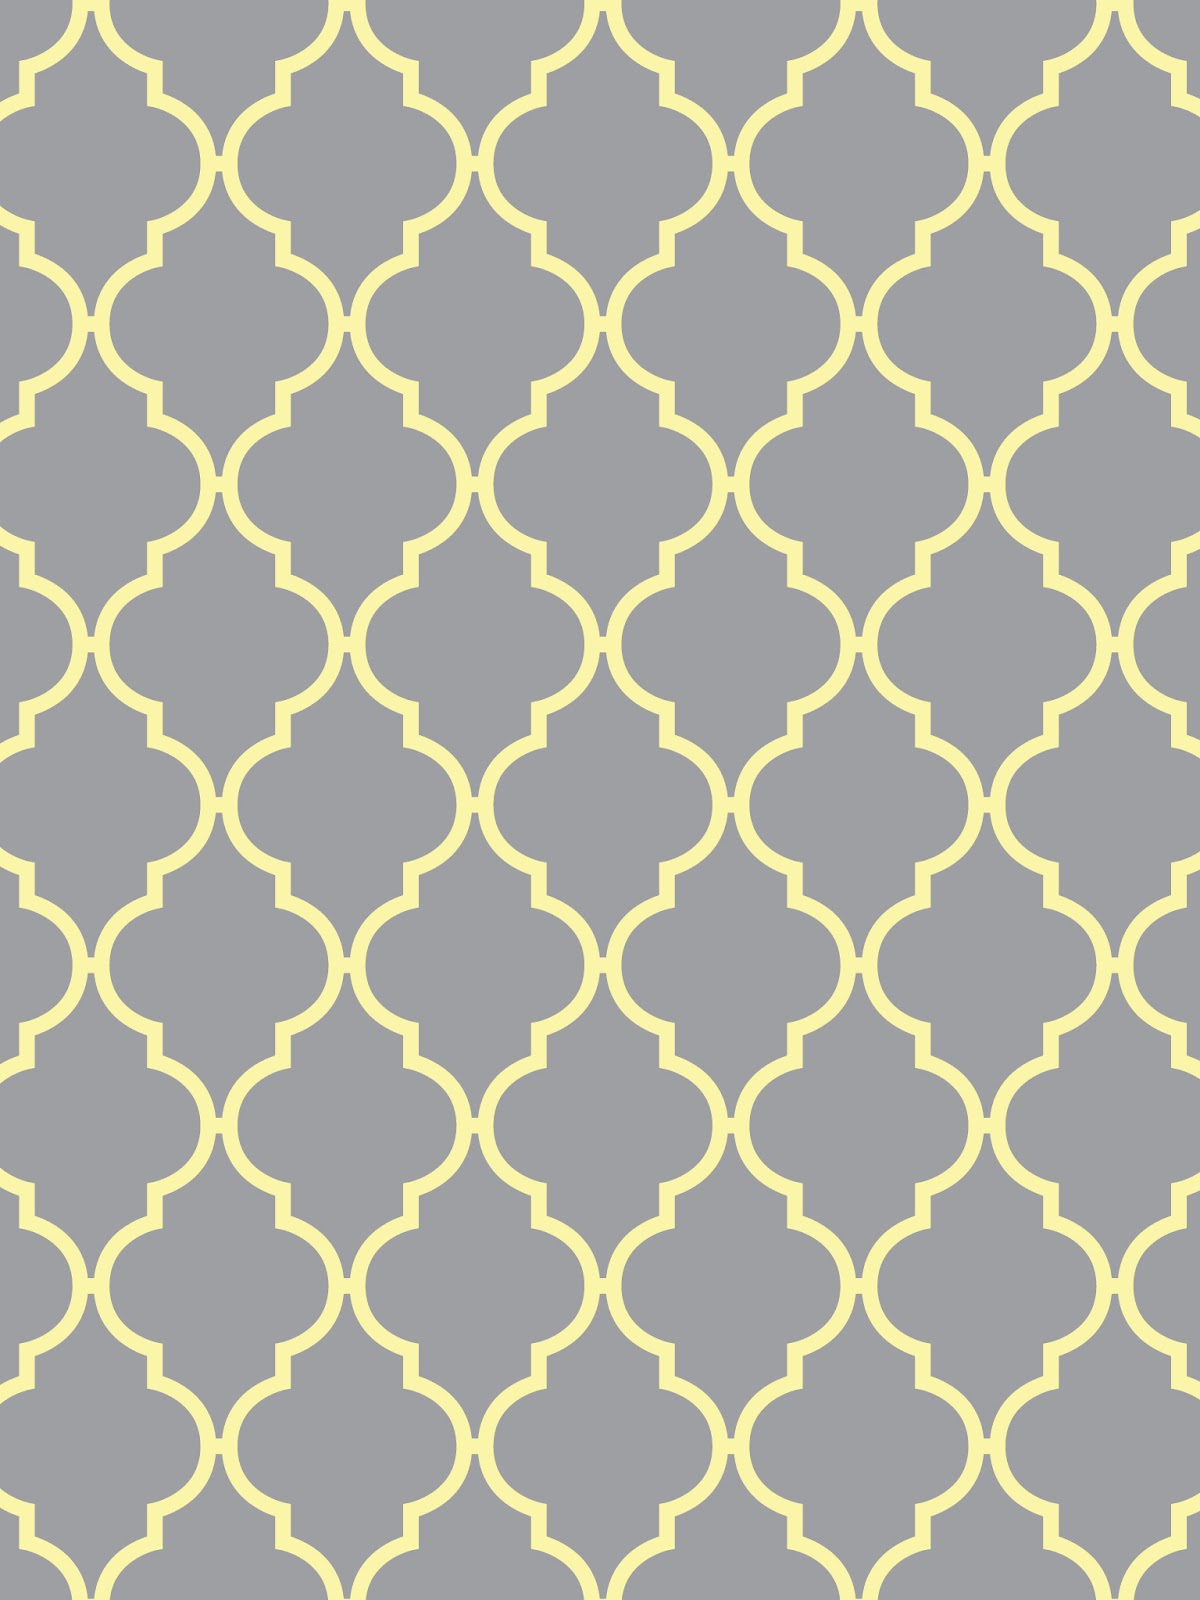 ... /Wallpapers: Quatrefoil...Light Gray with Yellow, Aqua, Pink, White